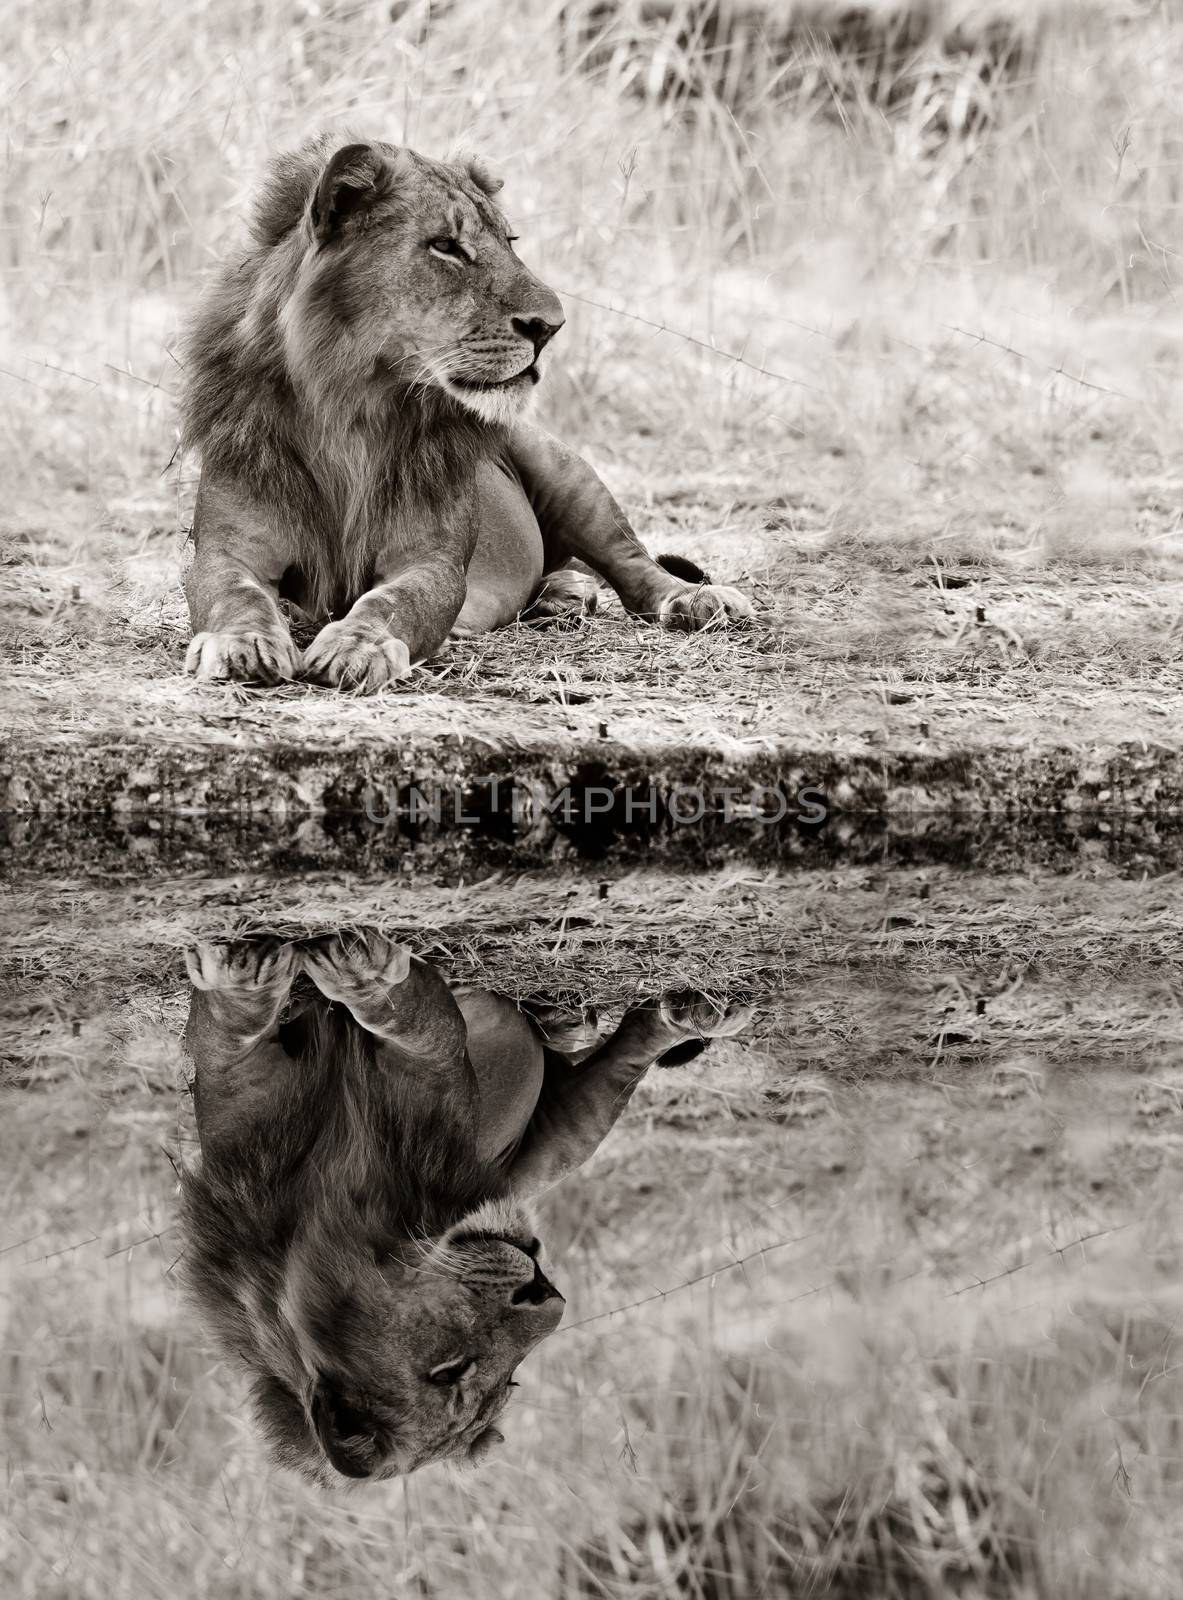 Perfect reflection of a male Lion relaxing in the wild